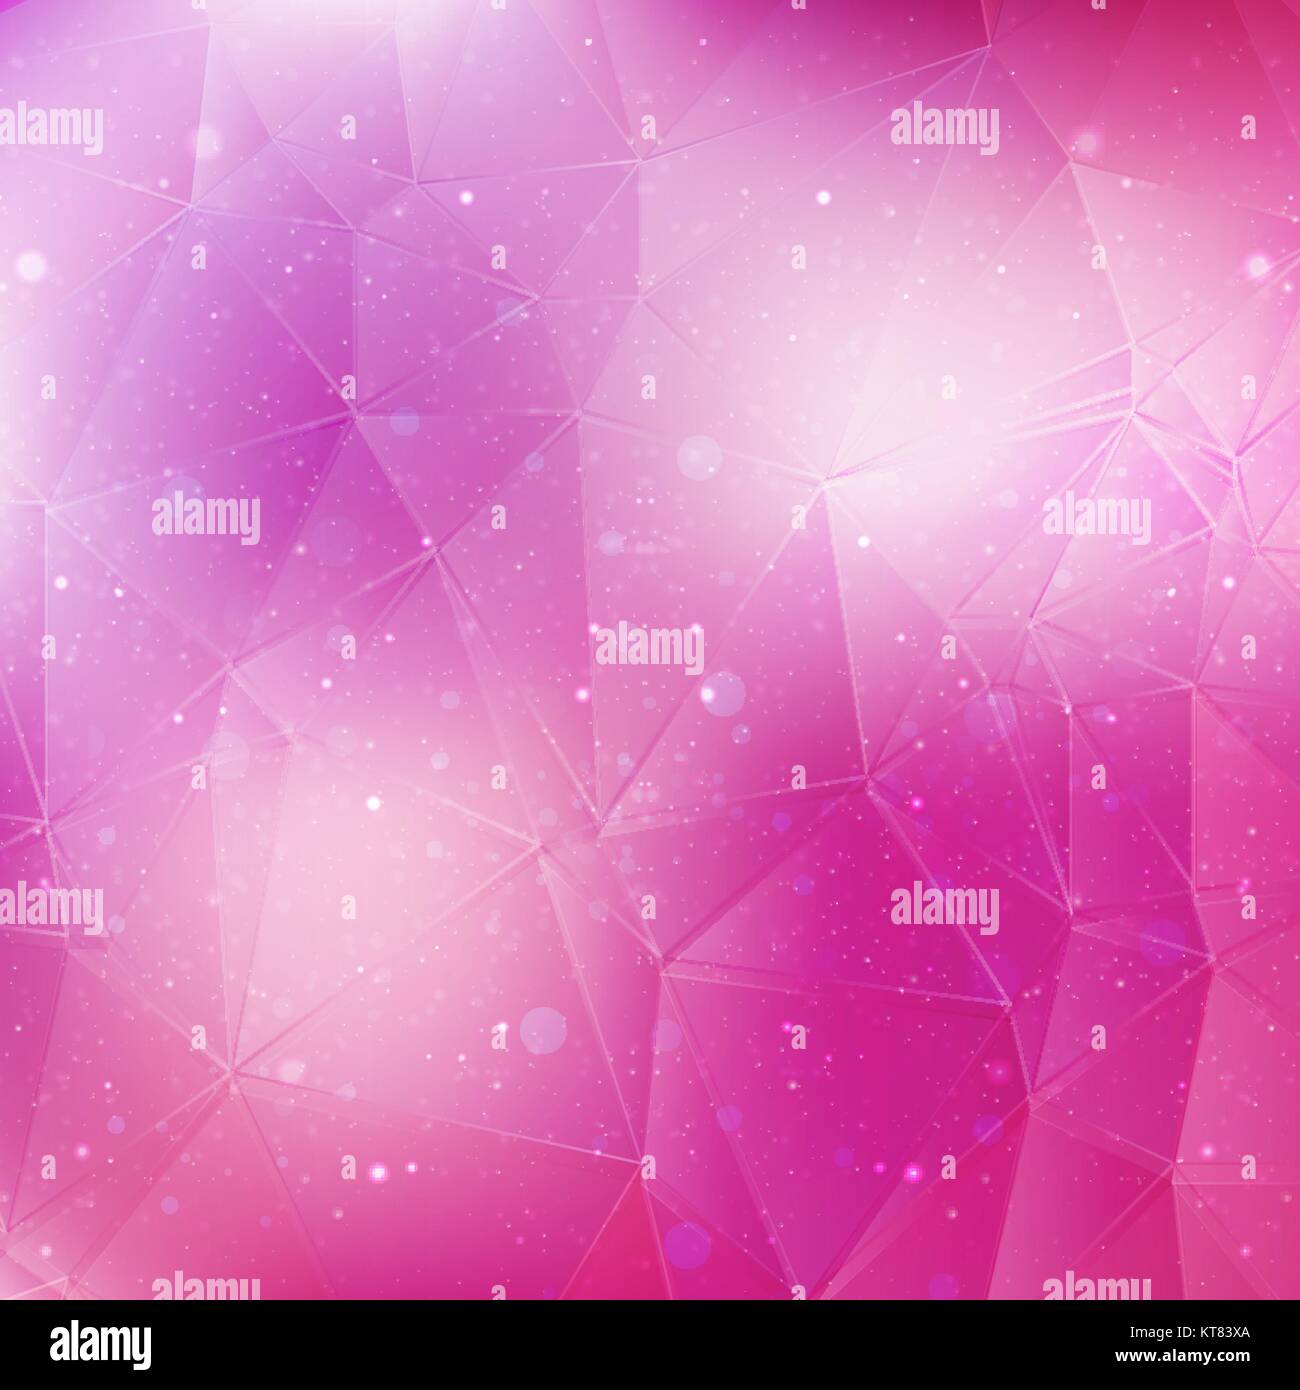 Vector pink background with stars Stock Vector